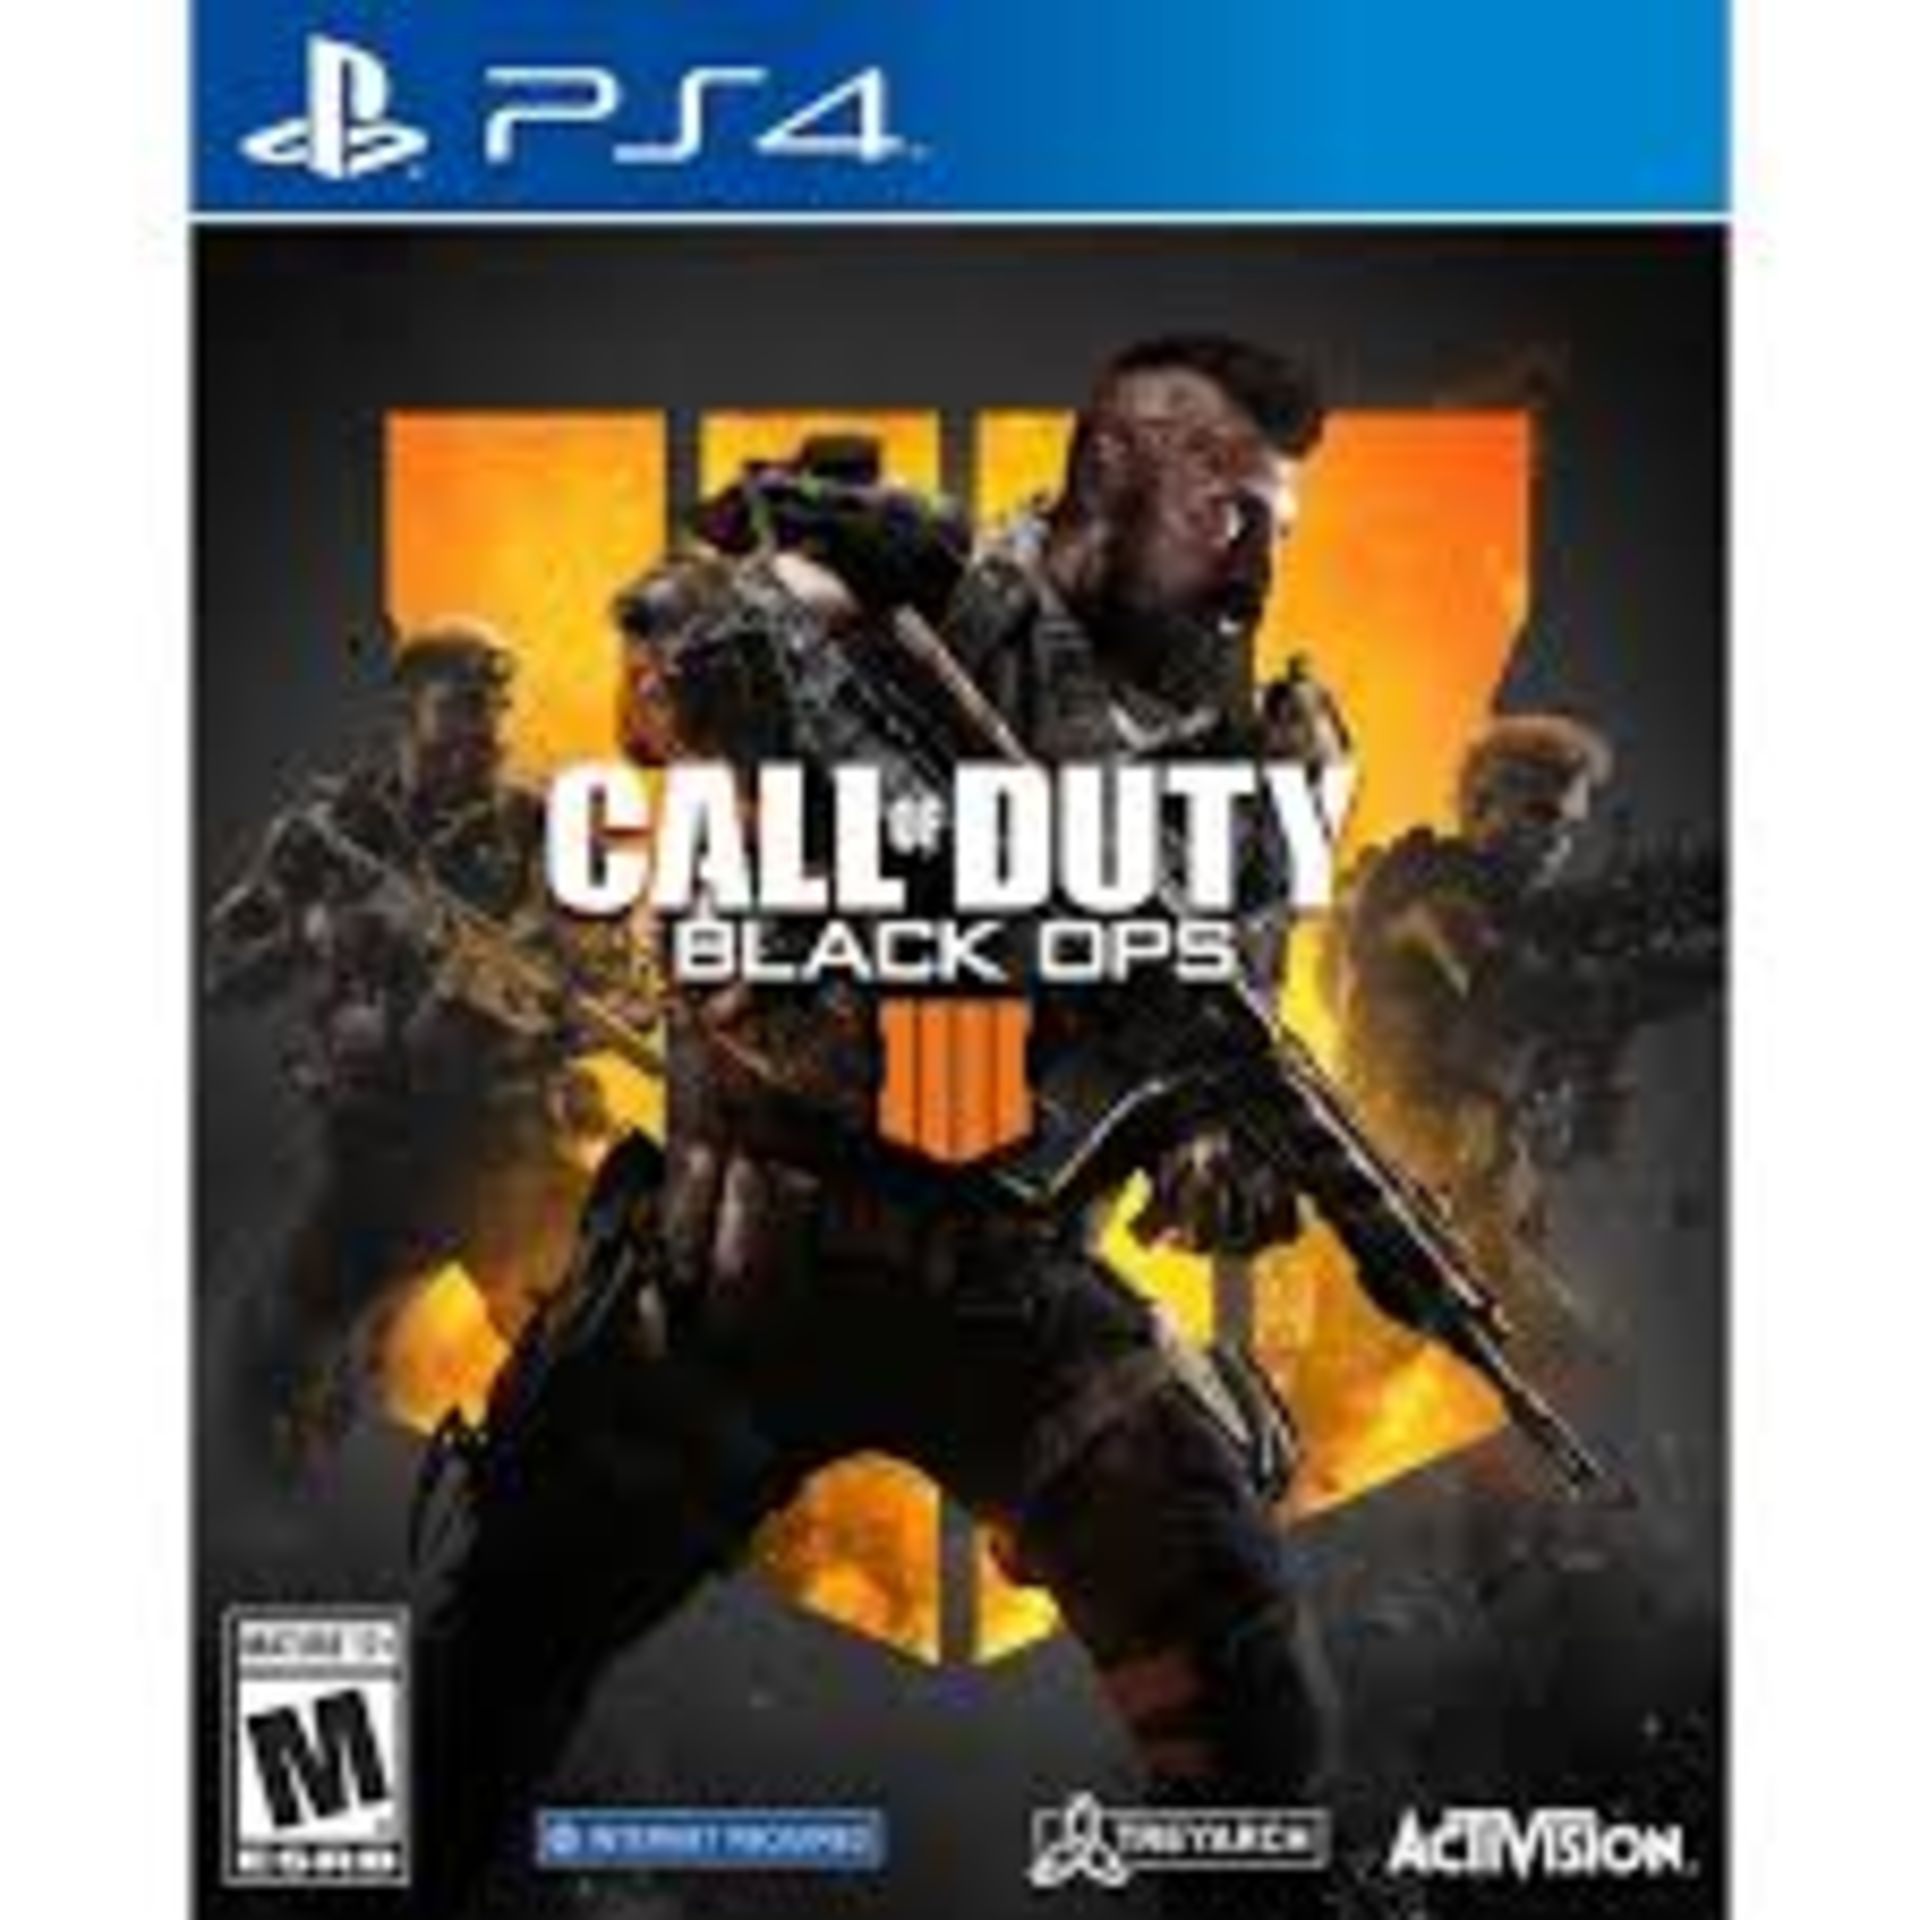 Brand New and Sealed Call of Duty Black Ops 3 PS4 Games (Public Viewing and Appraisals Available)